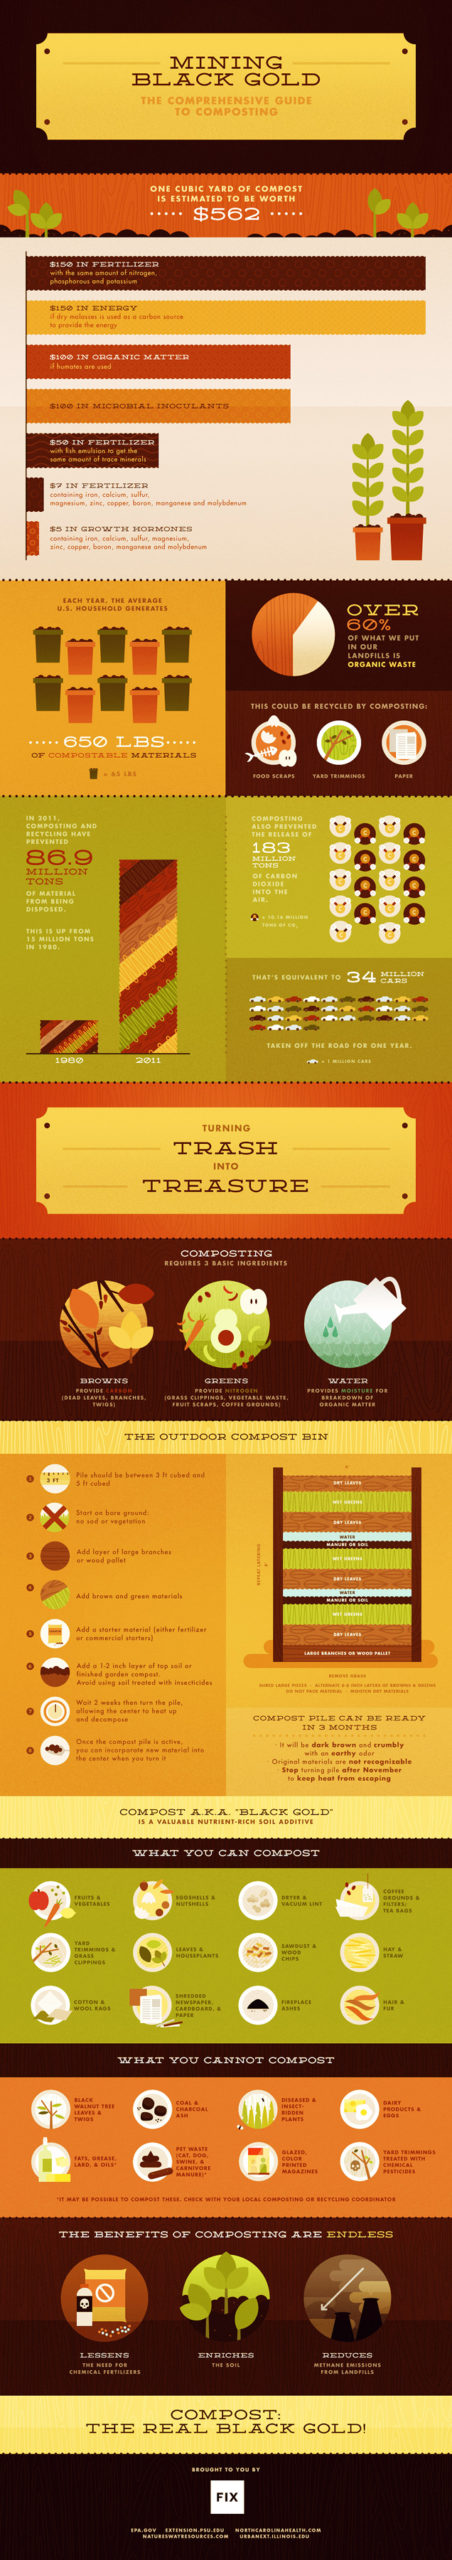 This Infographic Shows What You Can (And Can’t) Turn Into Compost